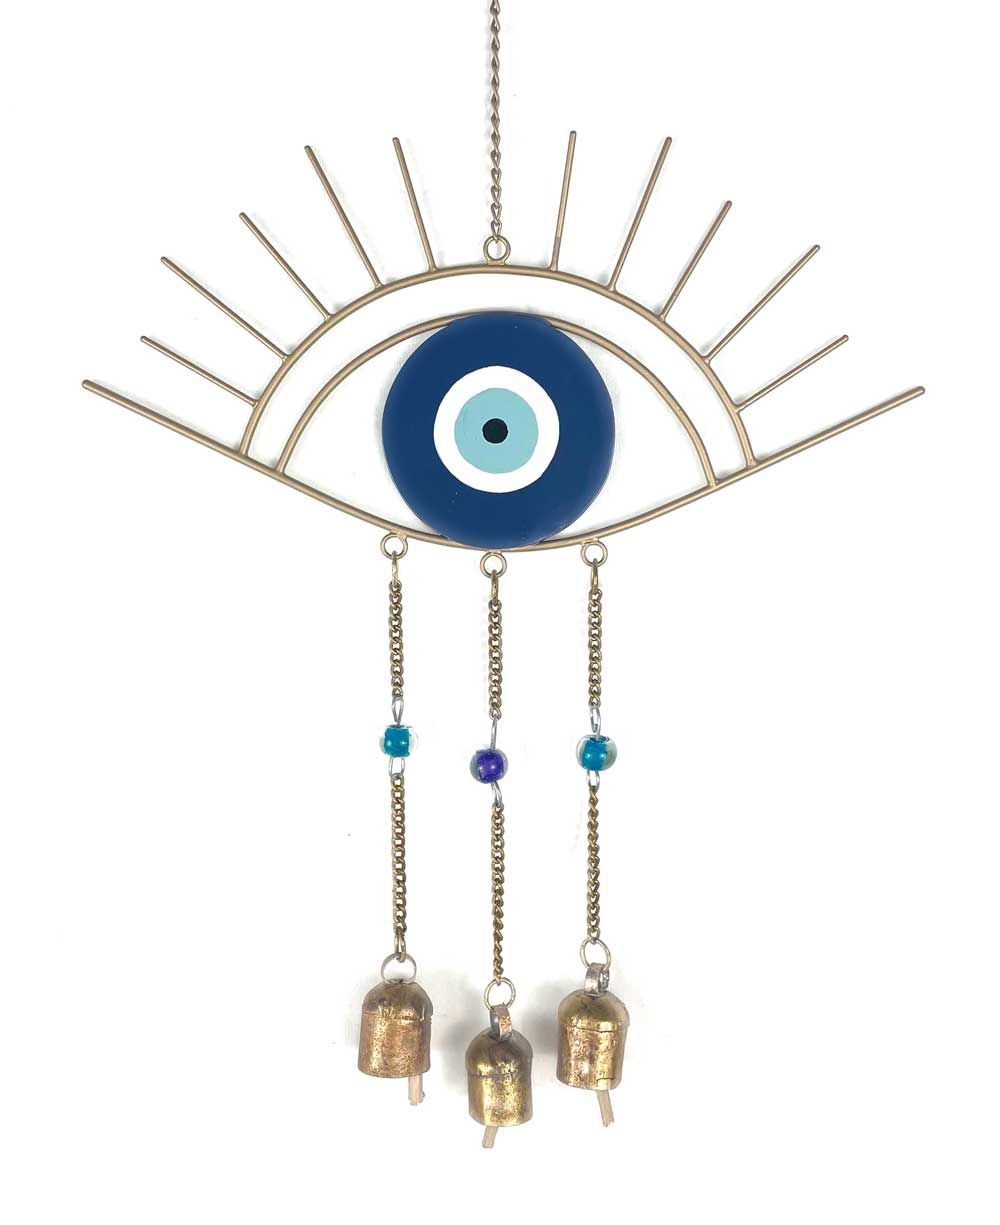 Hand-Painted Evil Eye Metal Chime Wall Hanging - Wind Chimes